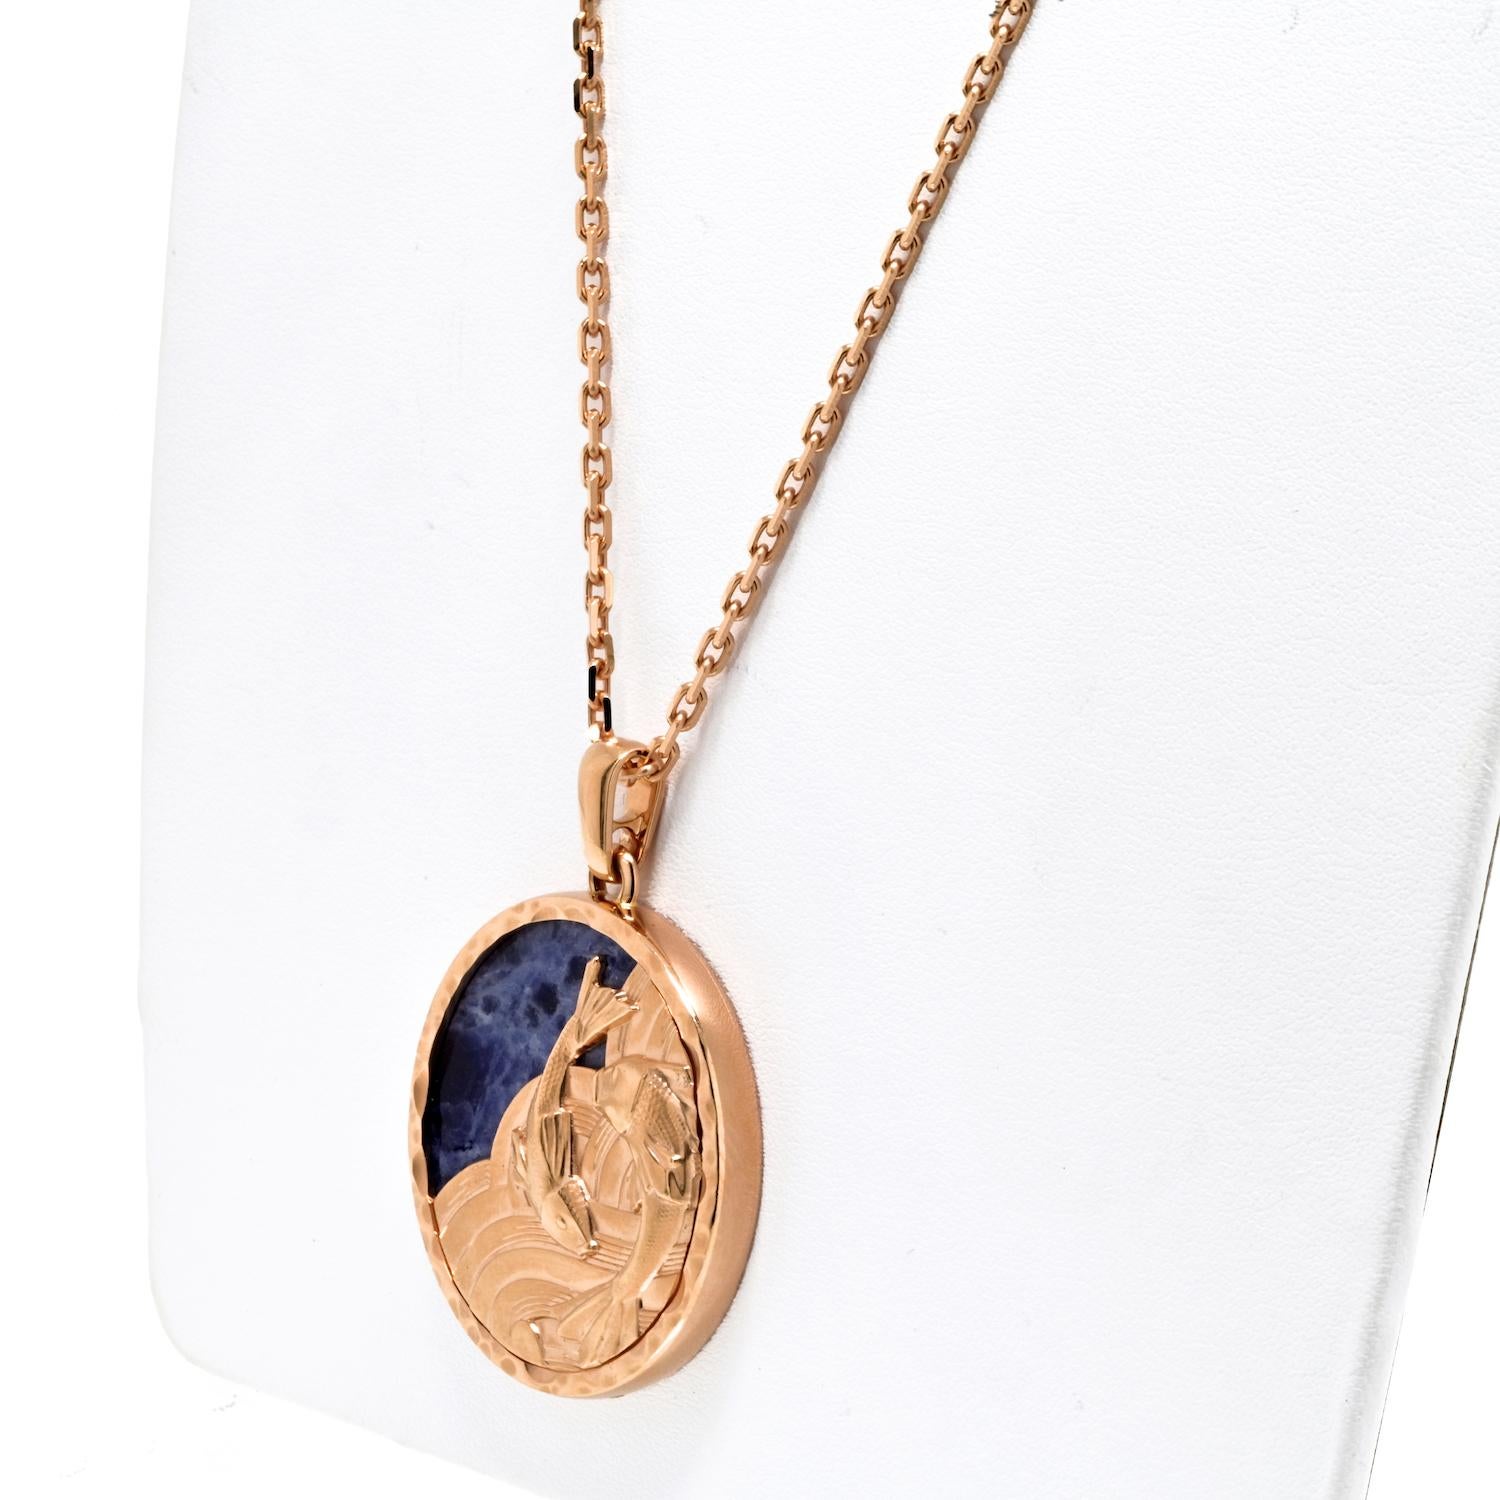 Modern Van Cleef and Arpels Pisces Zodiac Pendant On A Chain Necklace For Sale